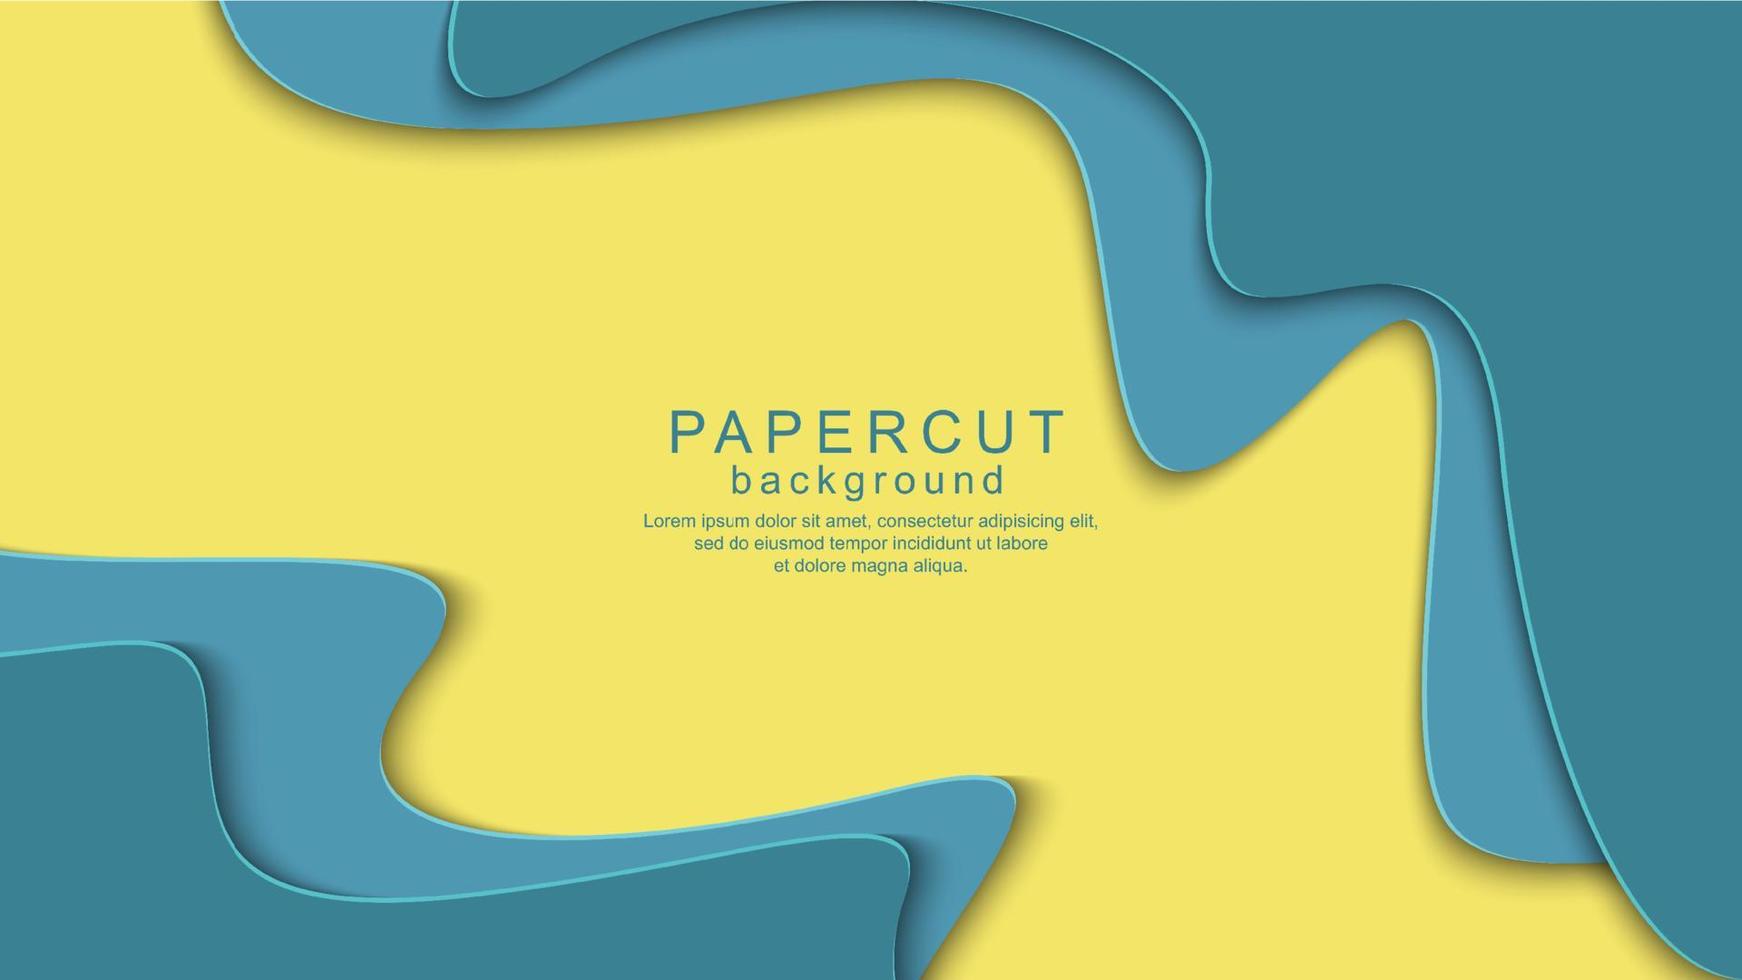 Abstract paper cut background with wavy design vector